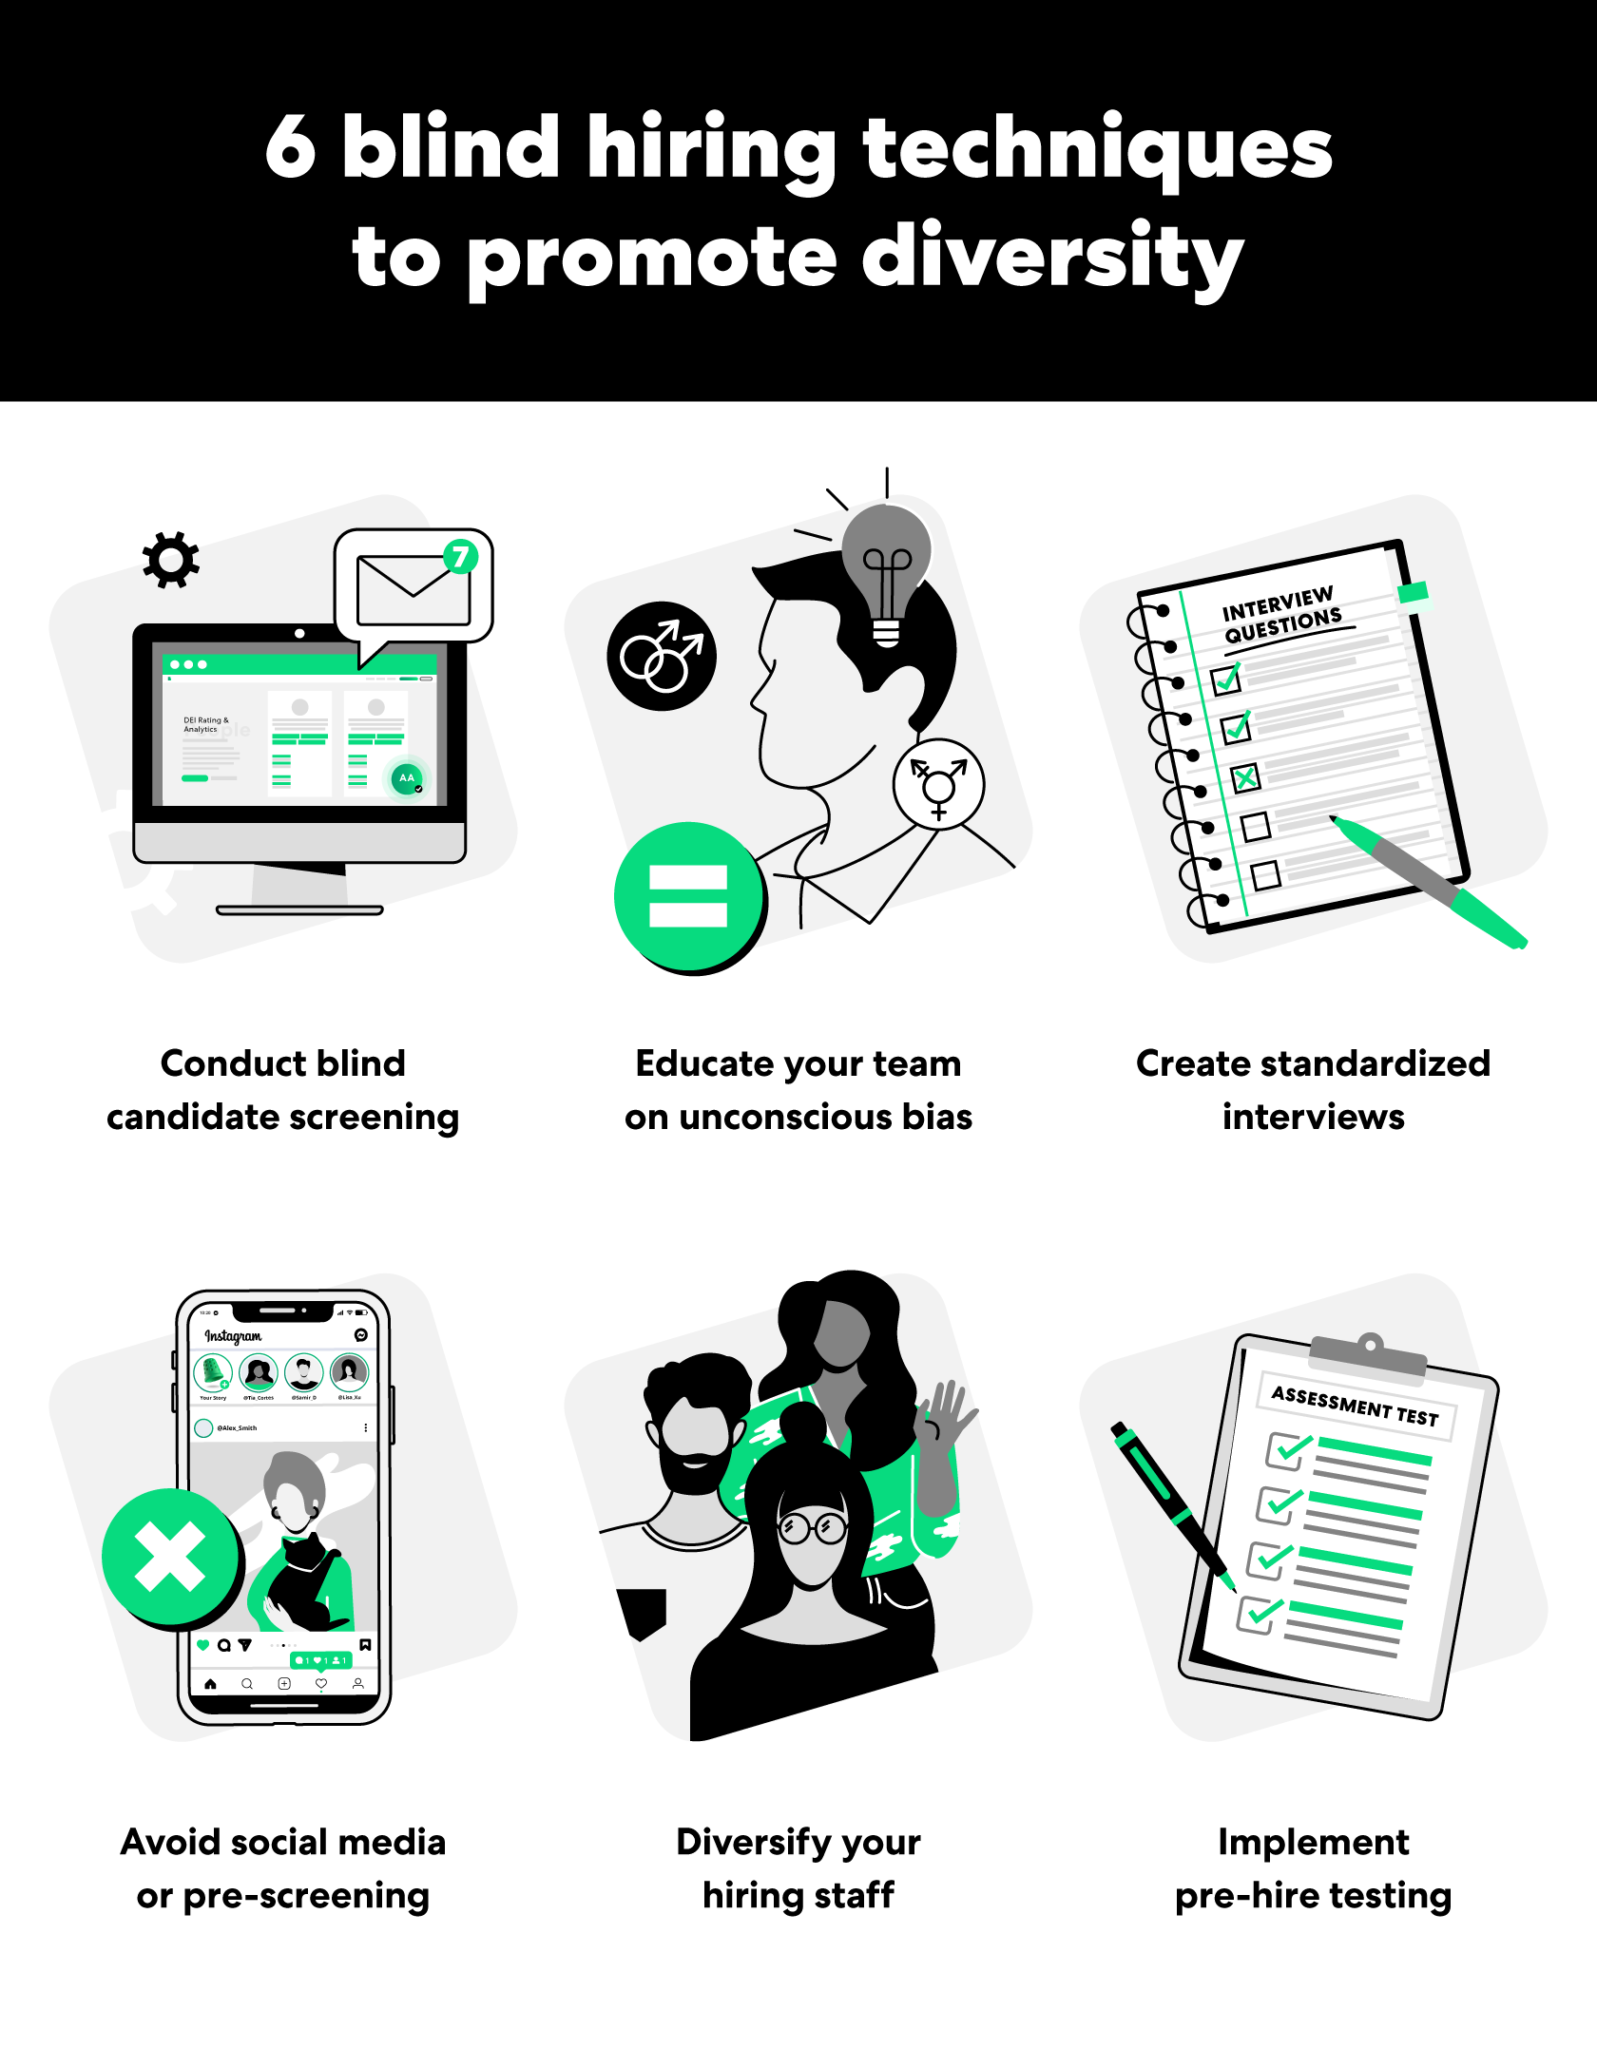 6 blind hiring techniques to promote diversity